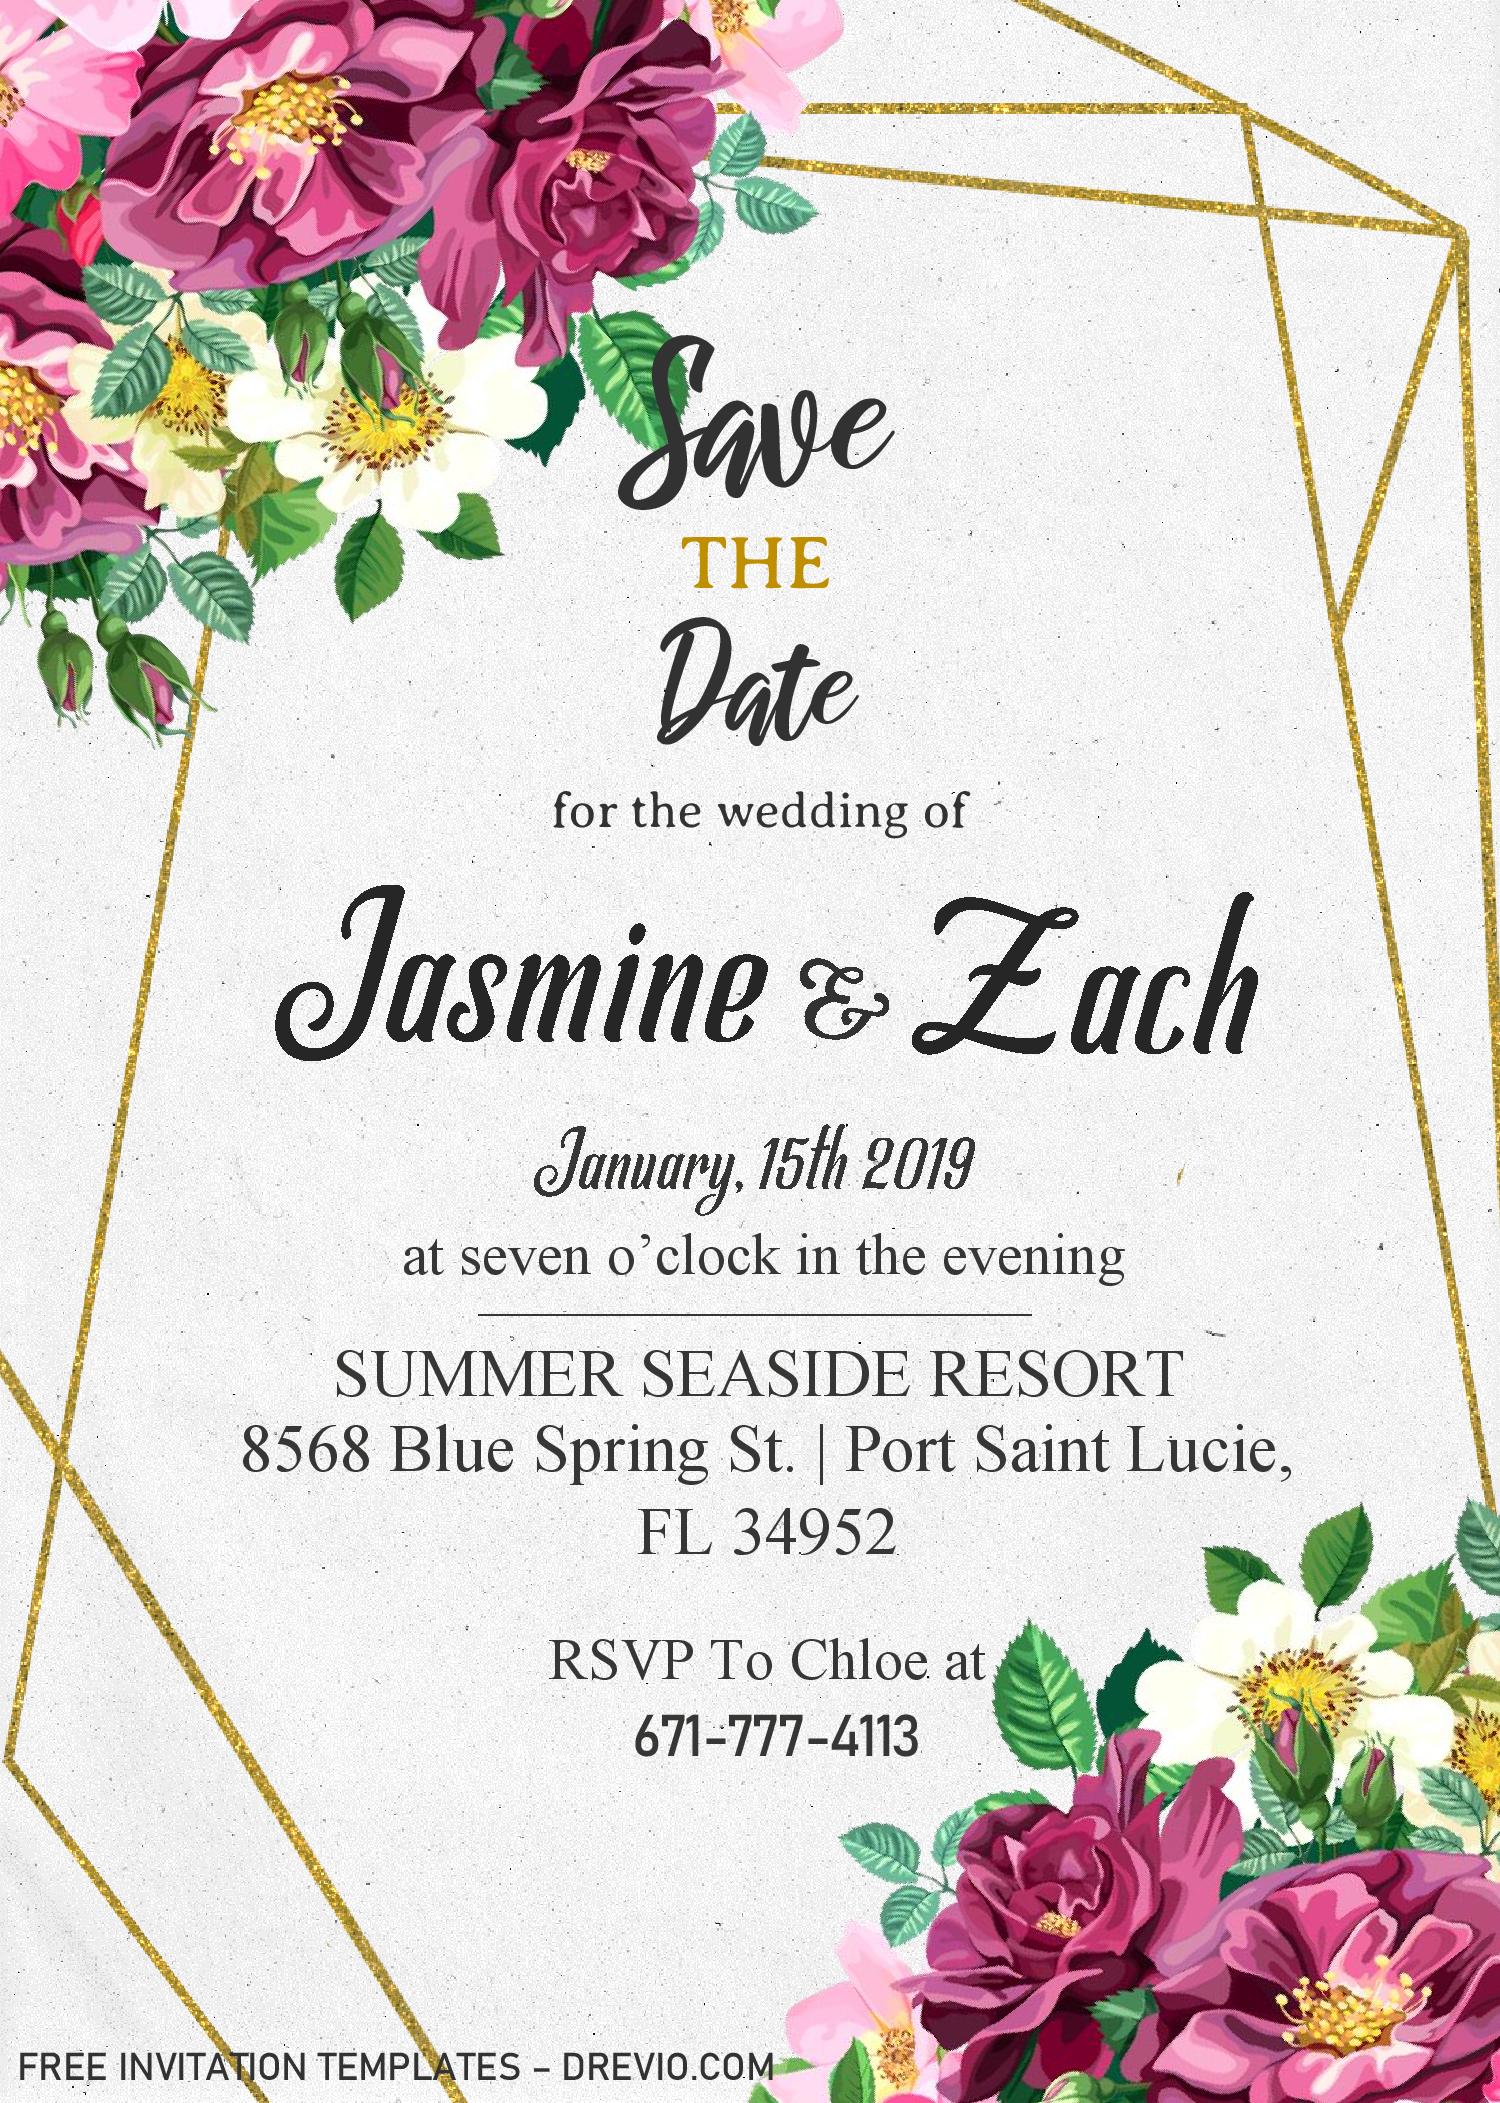 Save The Date Invitation Templates Editable With MS Word Download